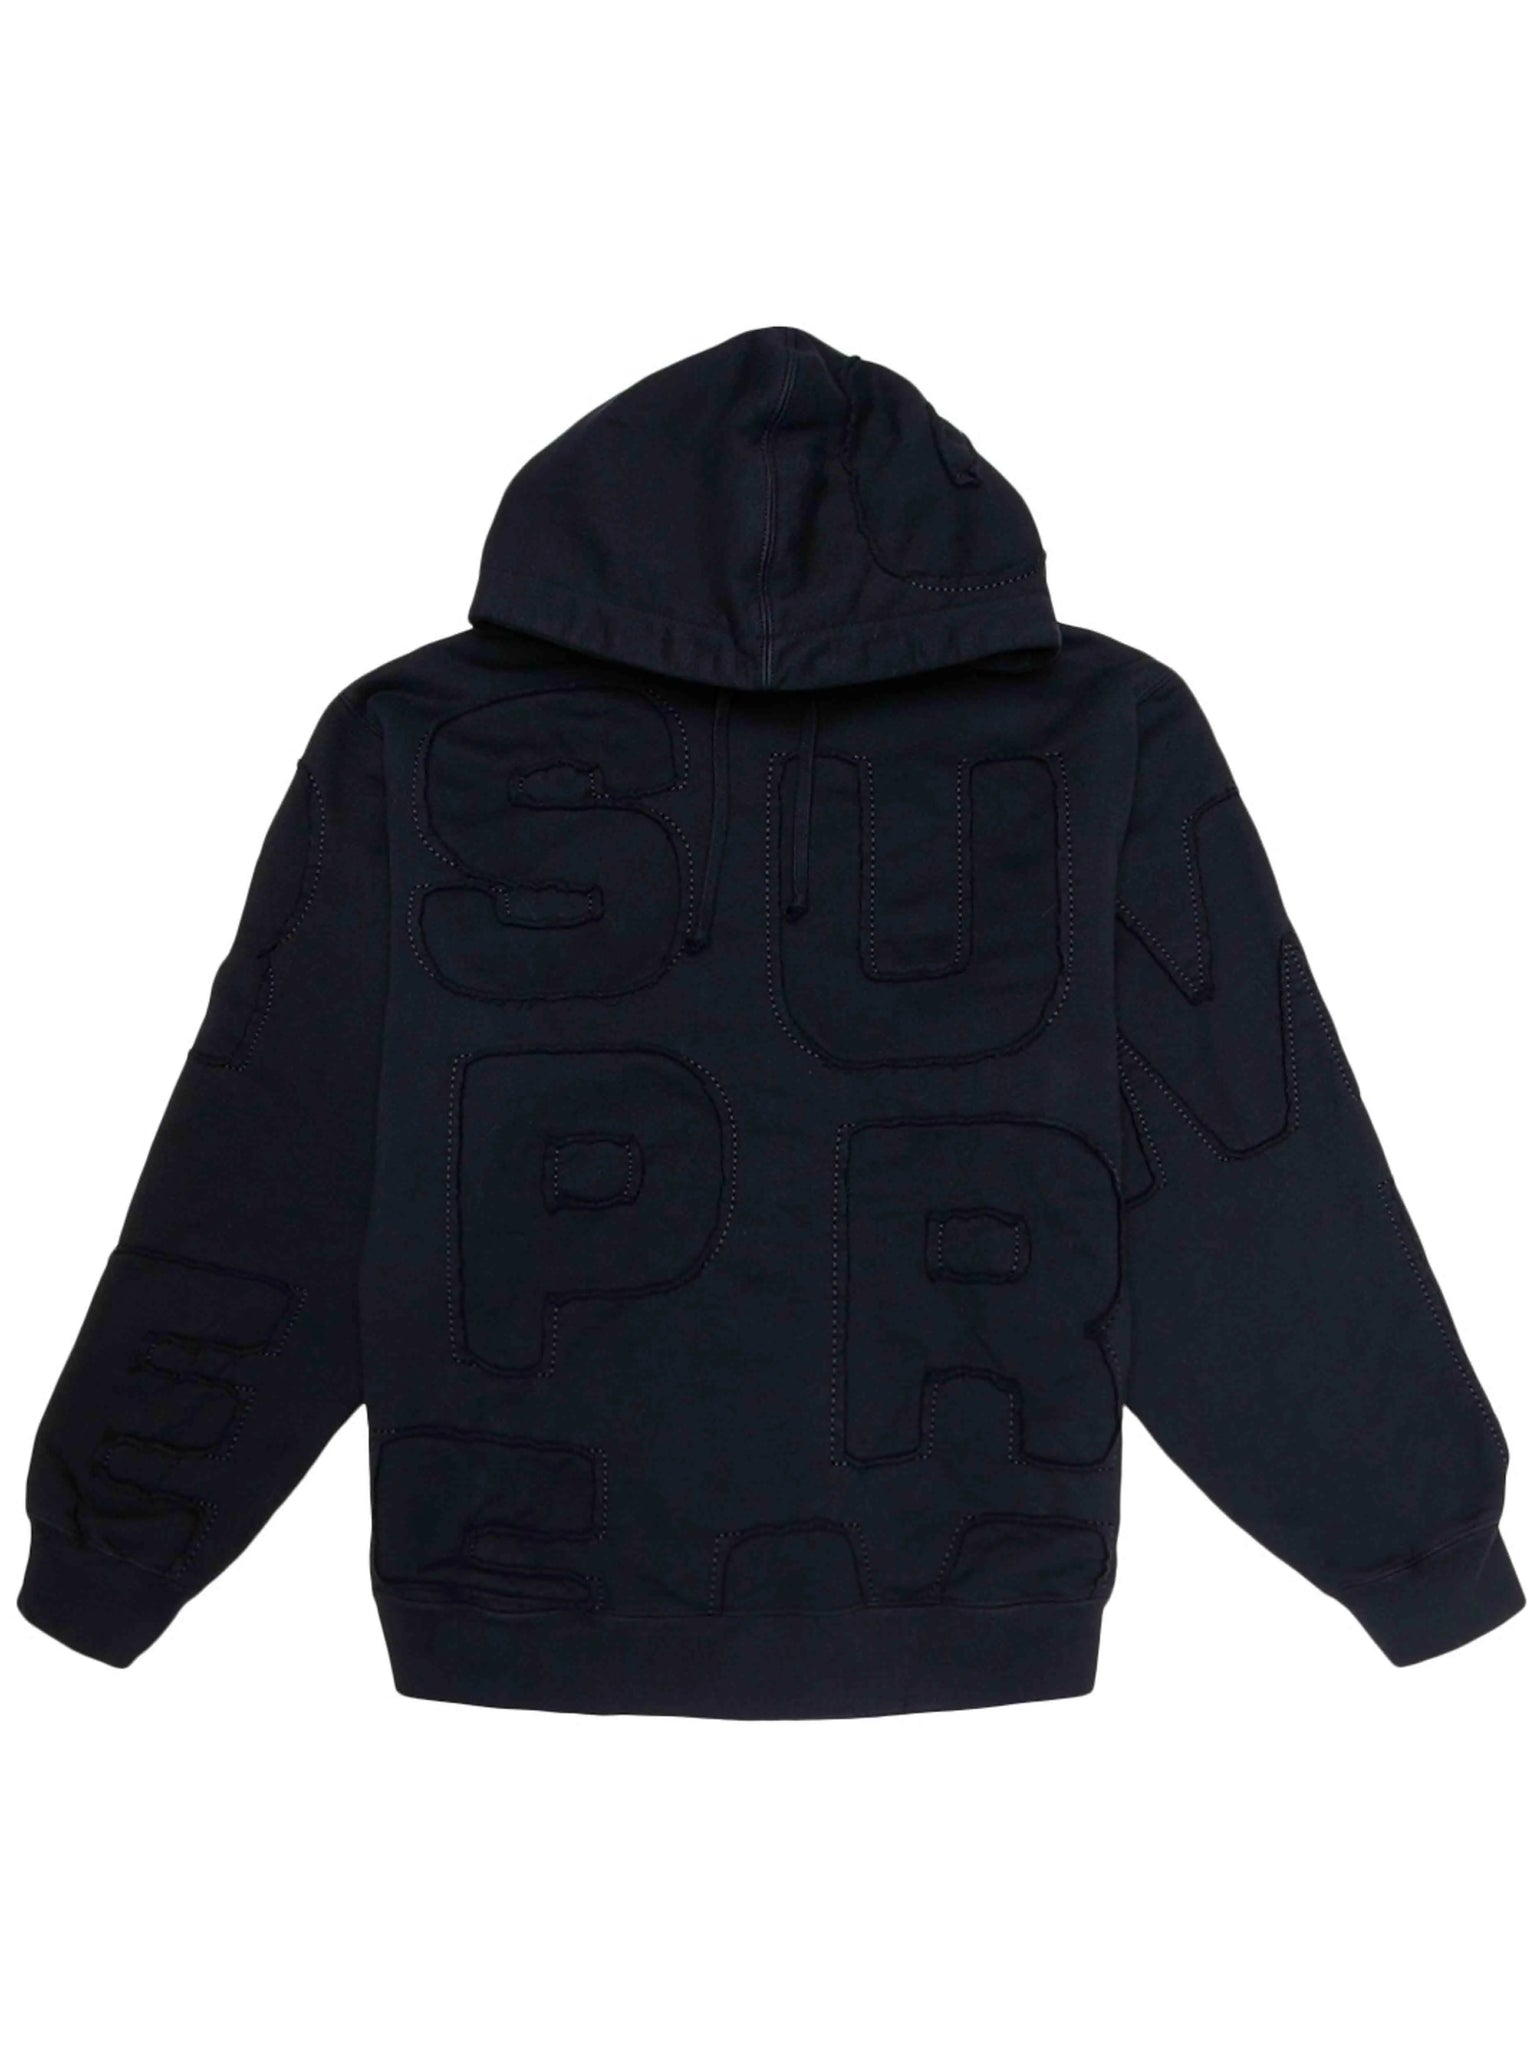 SUPREME CUTOUT LETTERS HOODIE BLACK [SS20] Prior